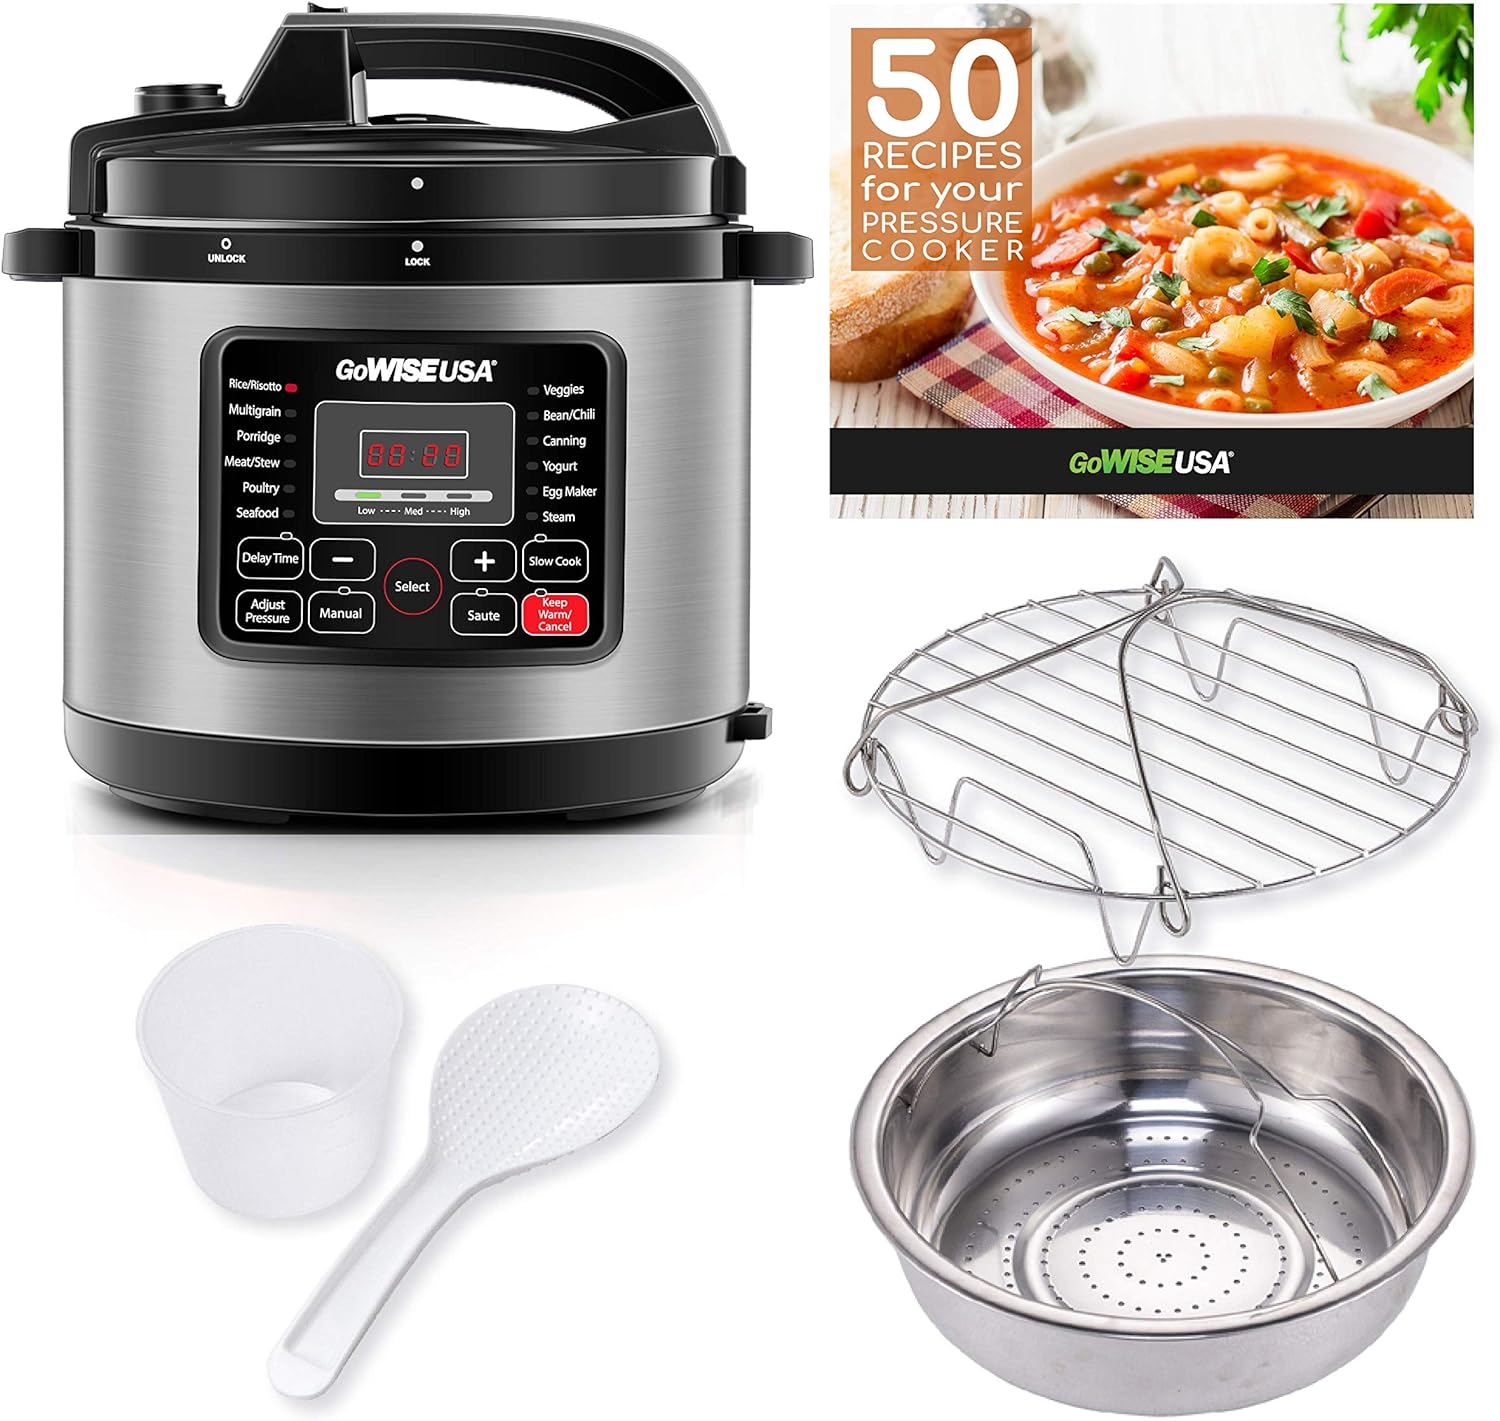 what-is-the-wattage-on-the-gowise-usa-14-qt-electric-pressure-cooker